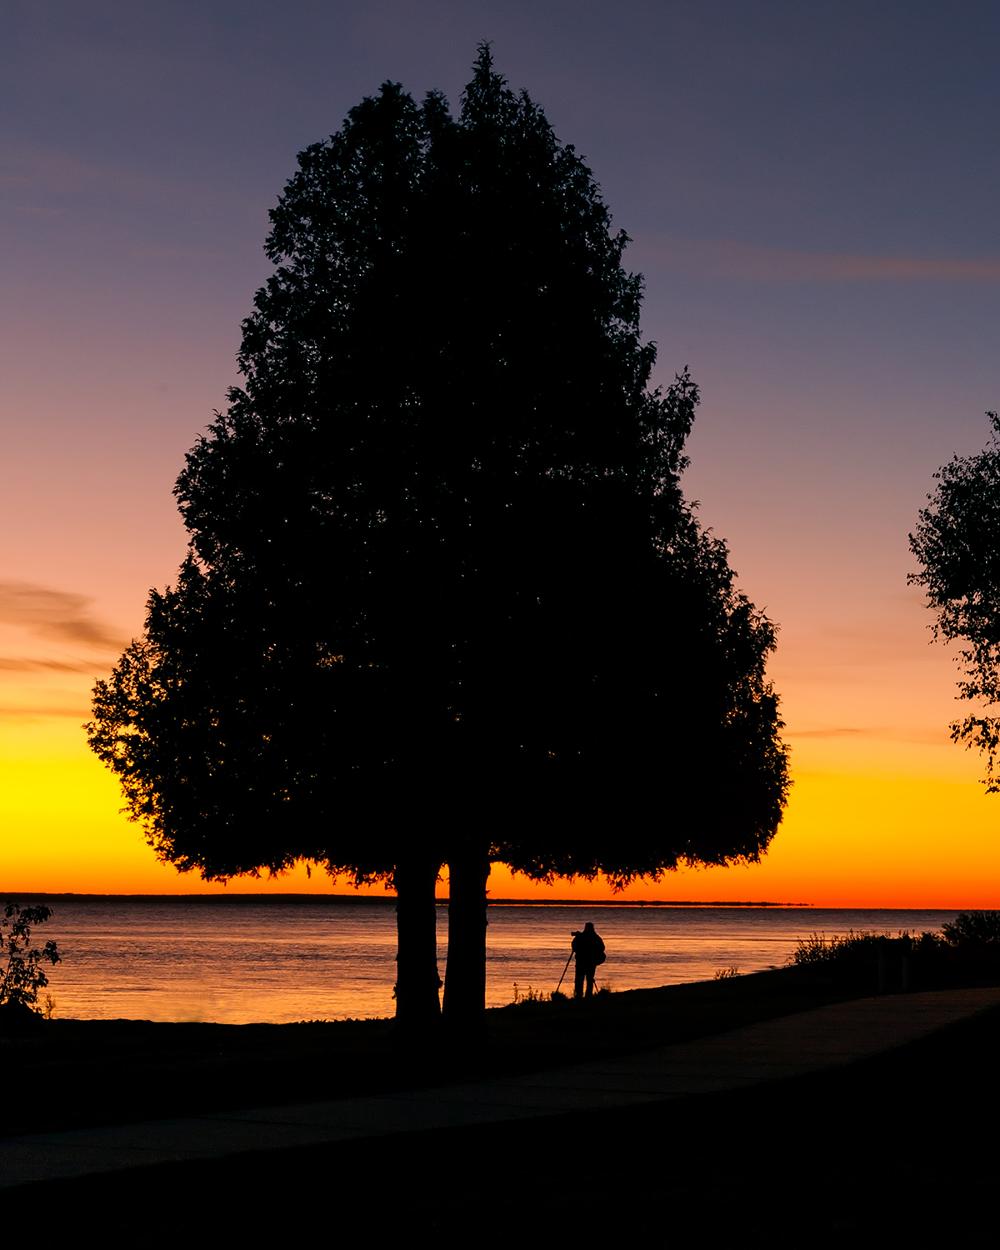 a person stands under a tree both in silhouette by an orang pre-sunrise sky